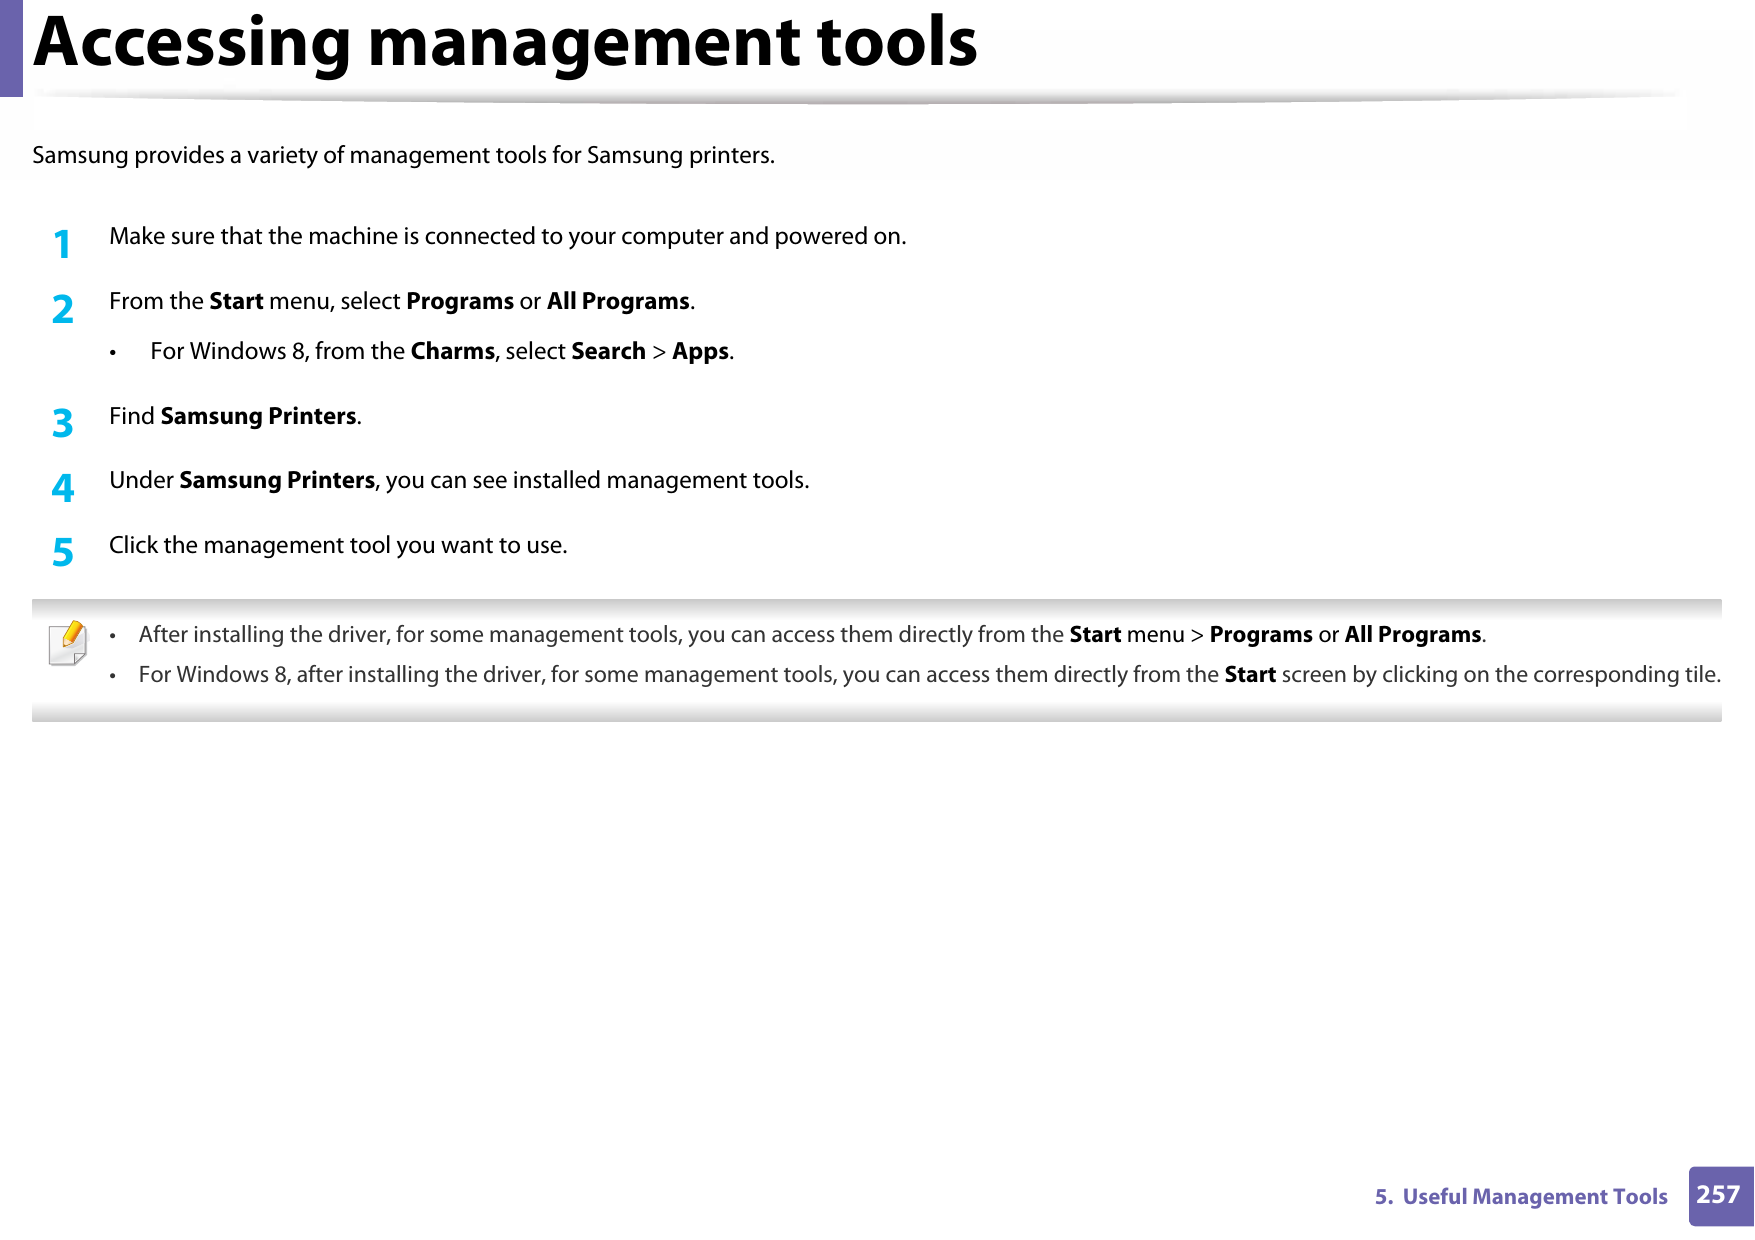 2575.  Useful Management ToolsAccessing management toolsSamsung provides a variety of management tools for Samsung printers. 1Make sure that the machine is connected to your computer and powered on.2  From the Start menu, select Programs or All Programs.• For Windows 8, from the Charms, select Search &gt; Apps.3  Find Samsung Printers.4  Under Samsung Printers, you can see installed management tools.5  Click the management tool you want to use. • After installing the driver, for some management tools, you can access them directly from the Start menu &gt; Programs or All Programs.• For Windows 8, after installing the driver, for some management tools, you can access them directly from the Start screen by clicking on the corresponding tile. 